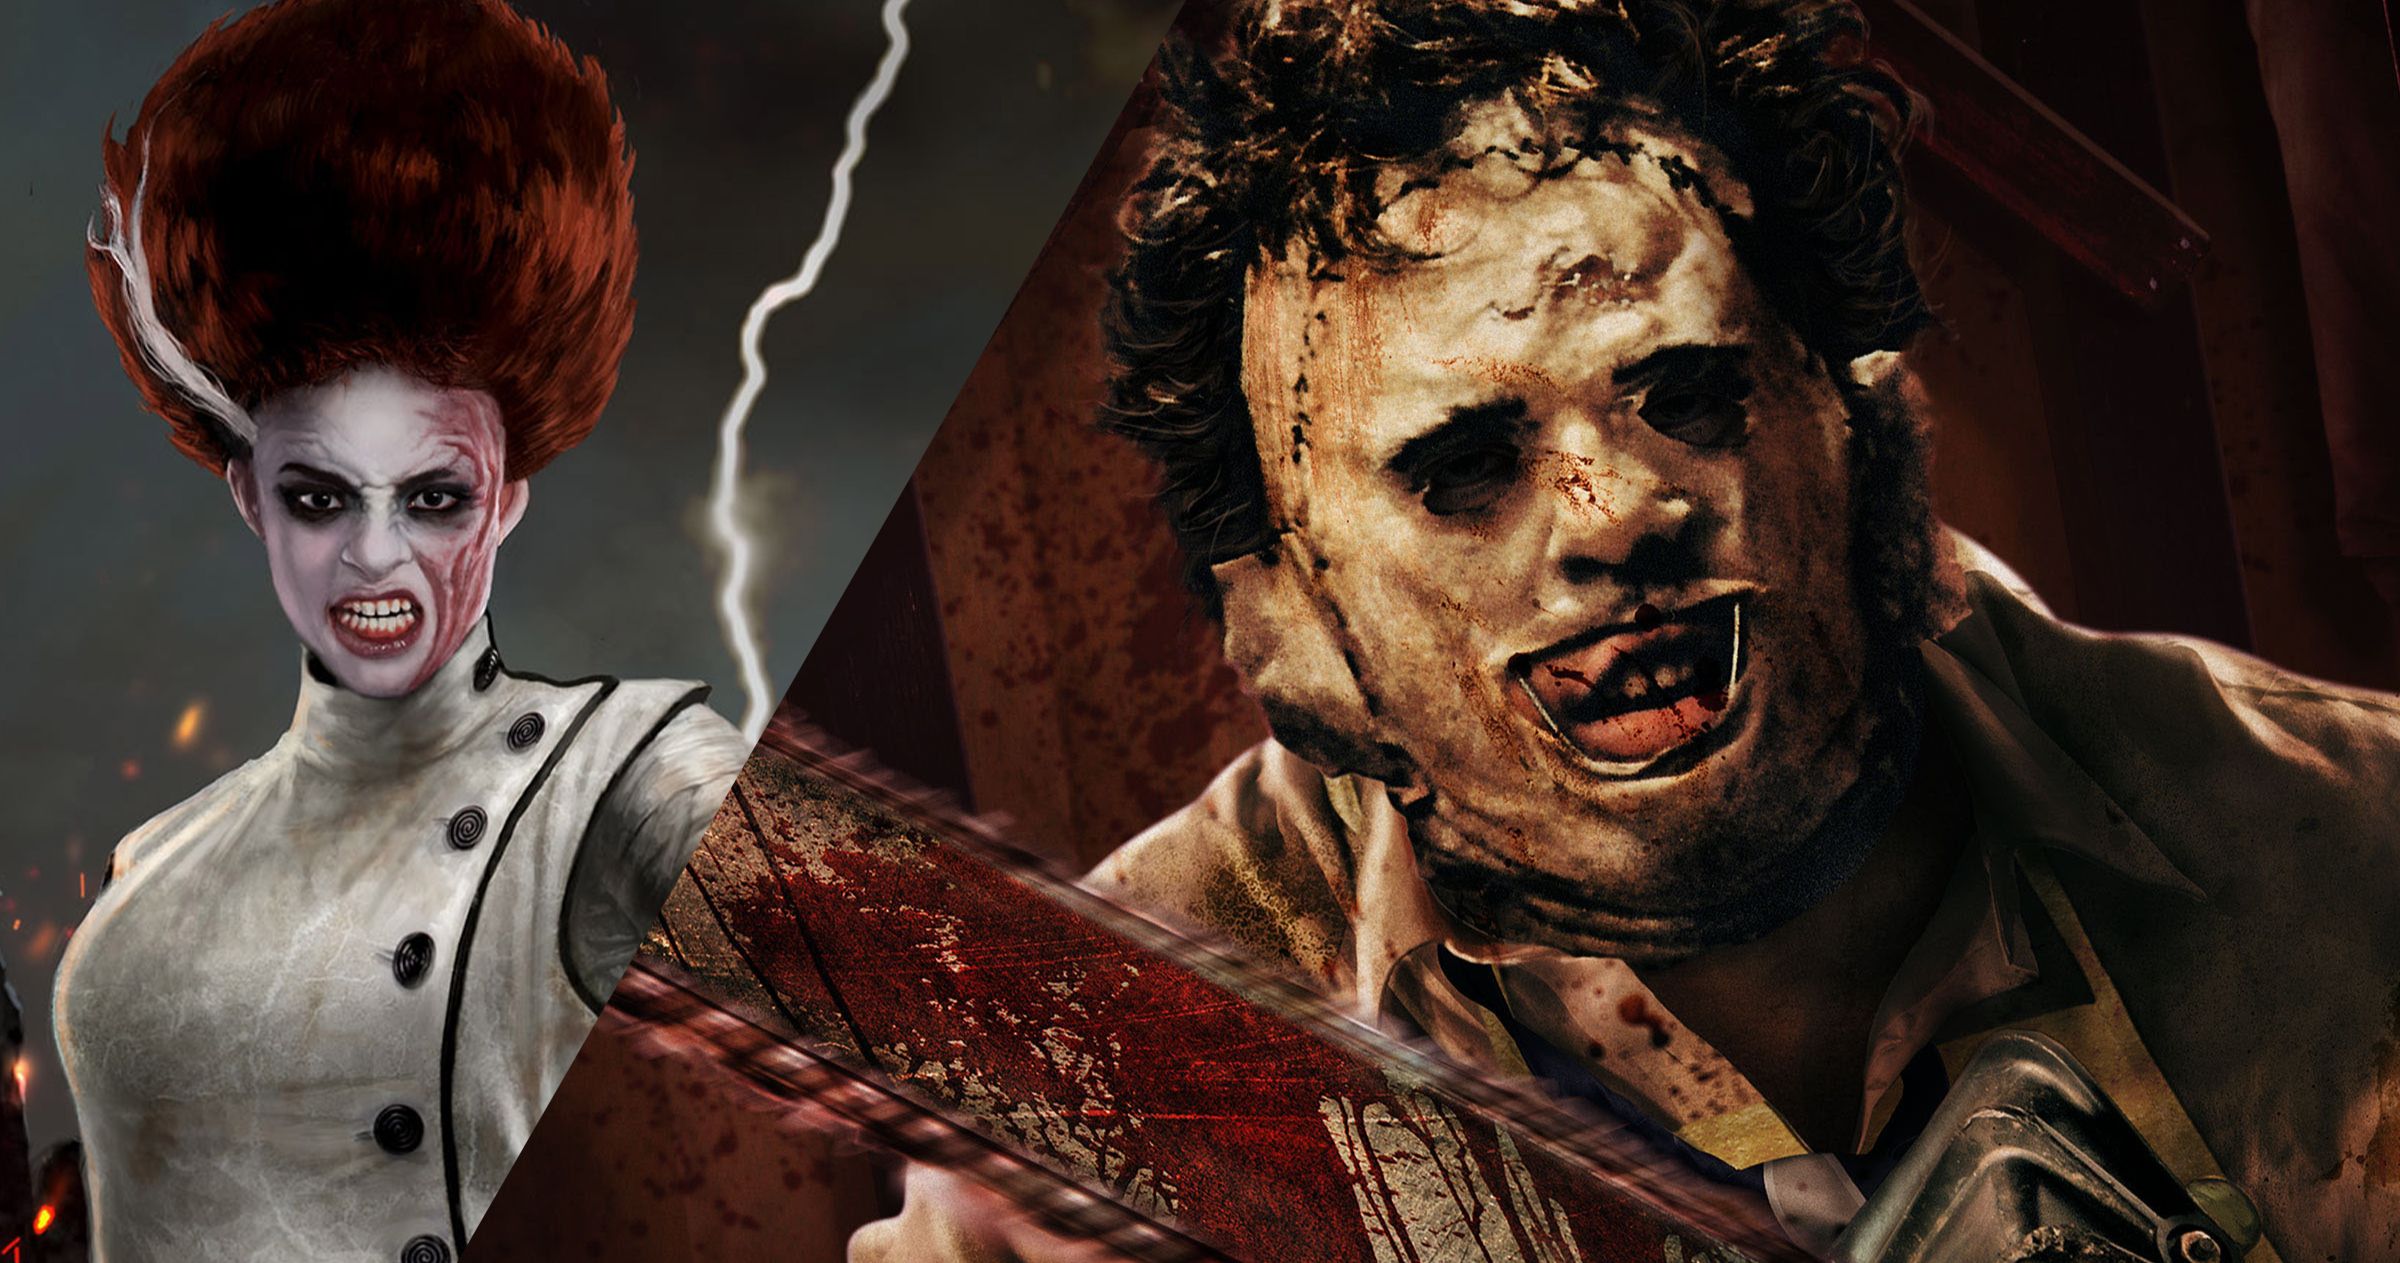 Leatherface and the Bride of Frankenstein Join Halloween Horror Nights